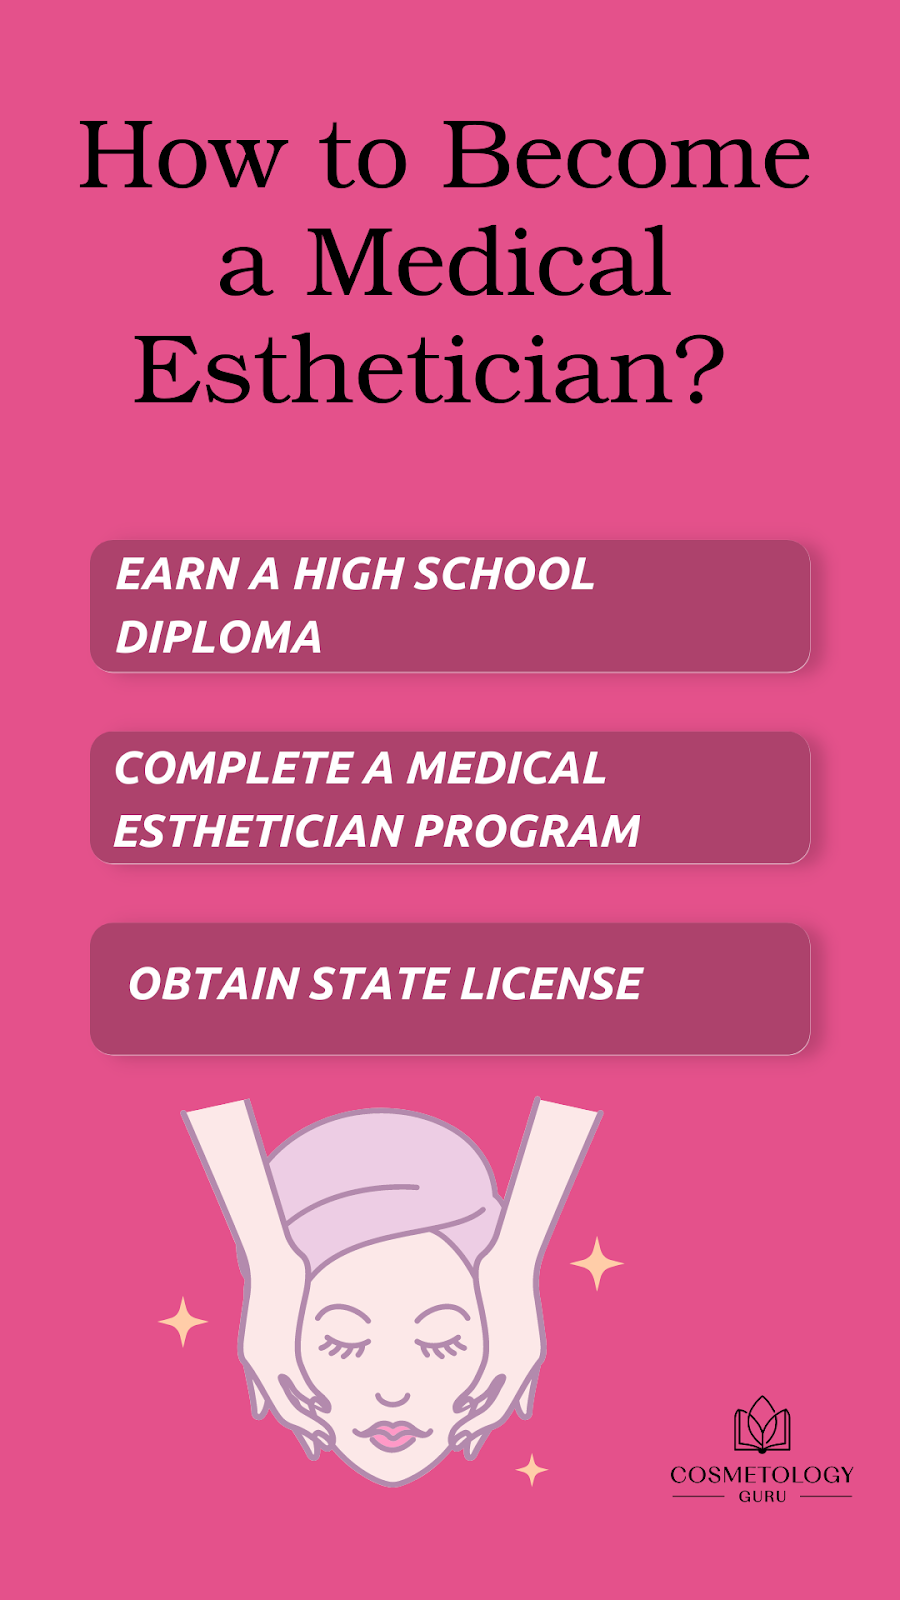 How to Become a Medical Esthetician